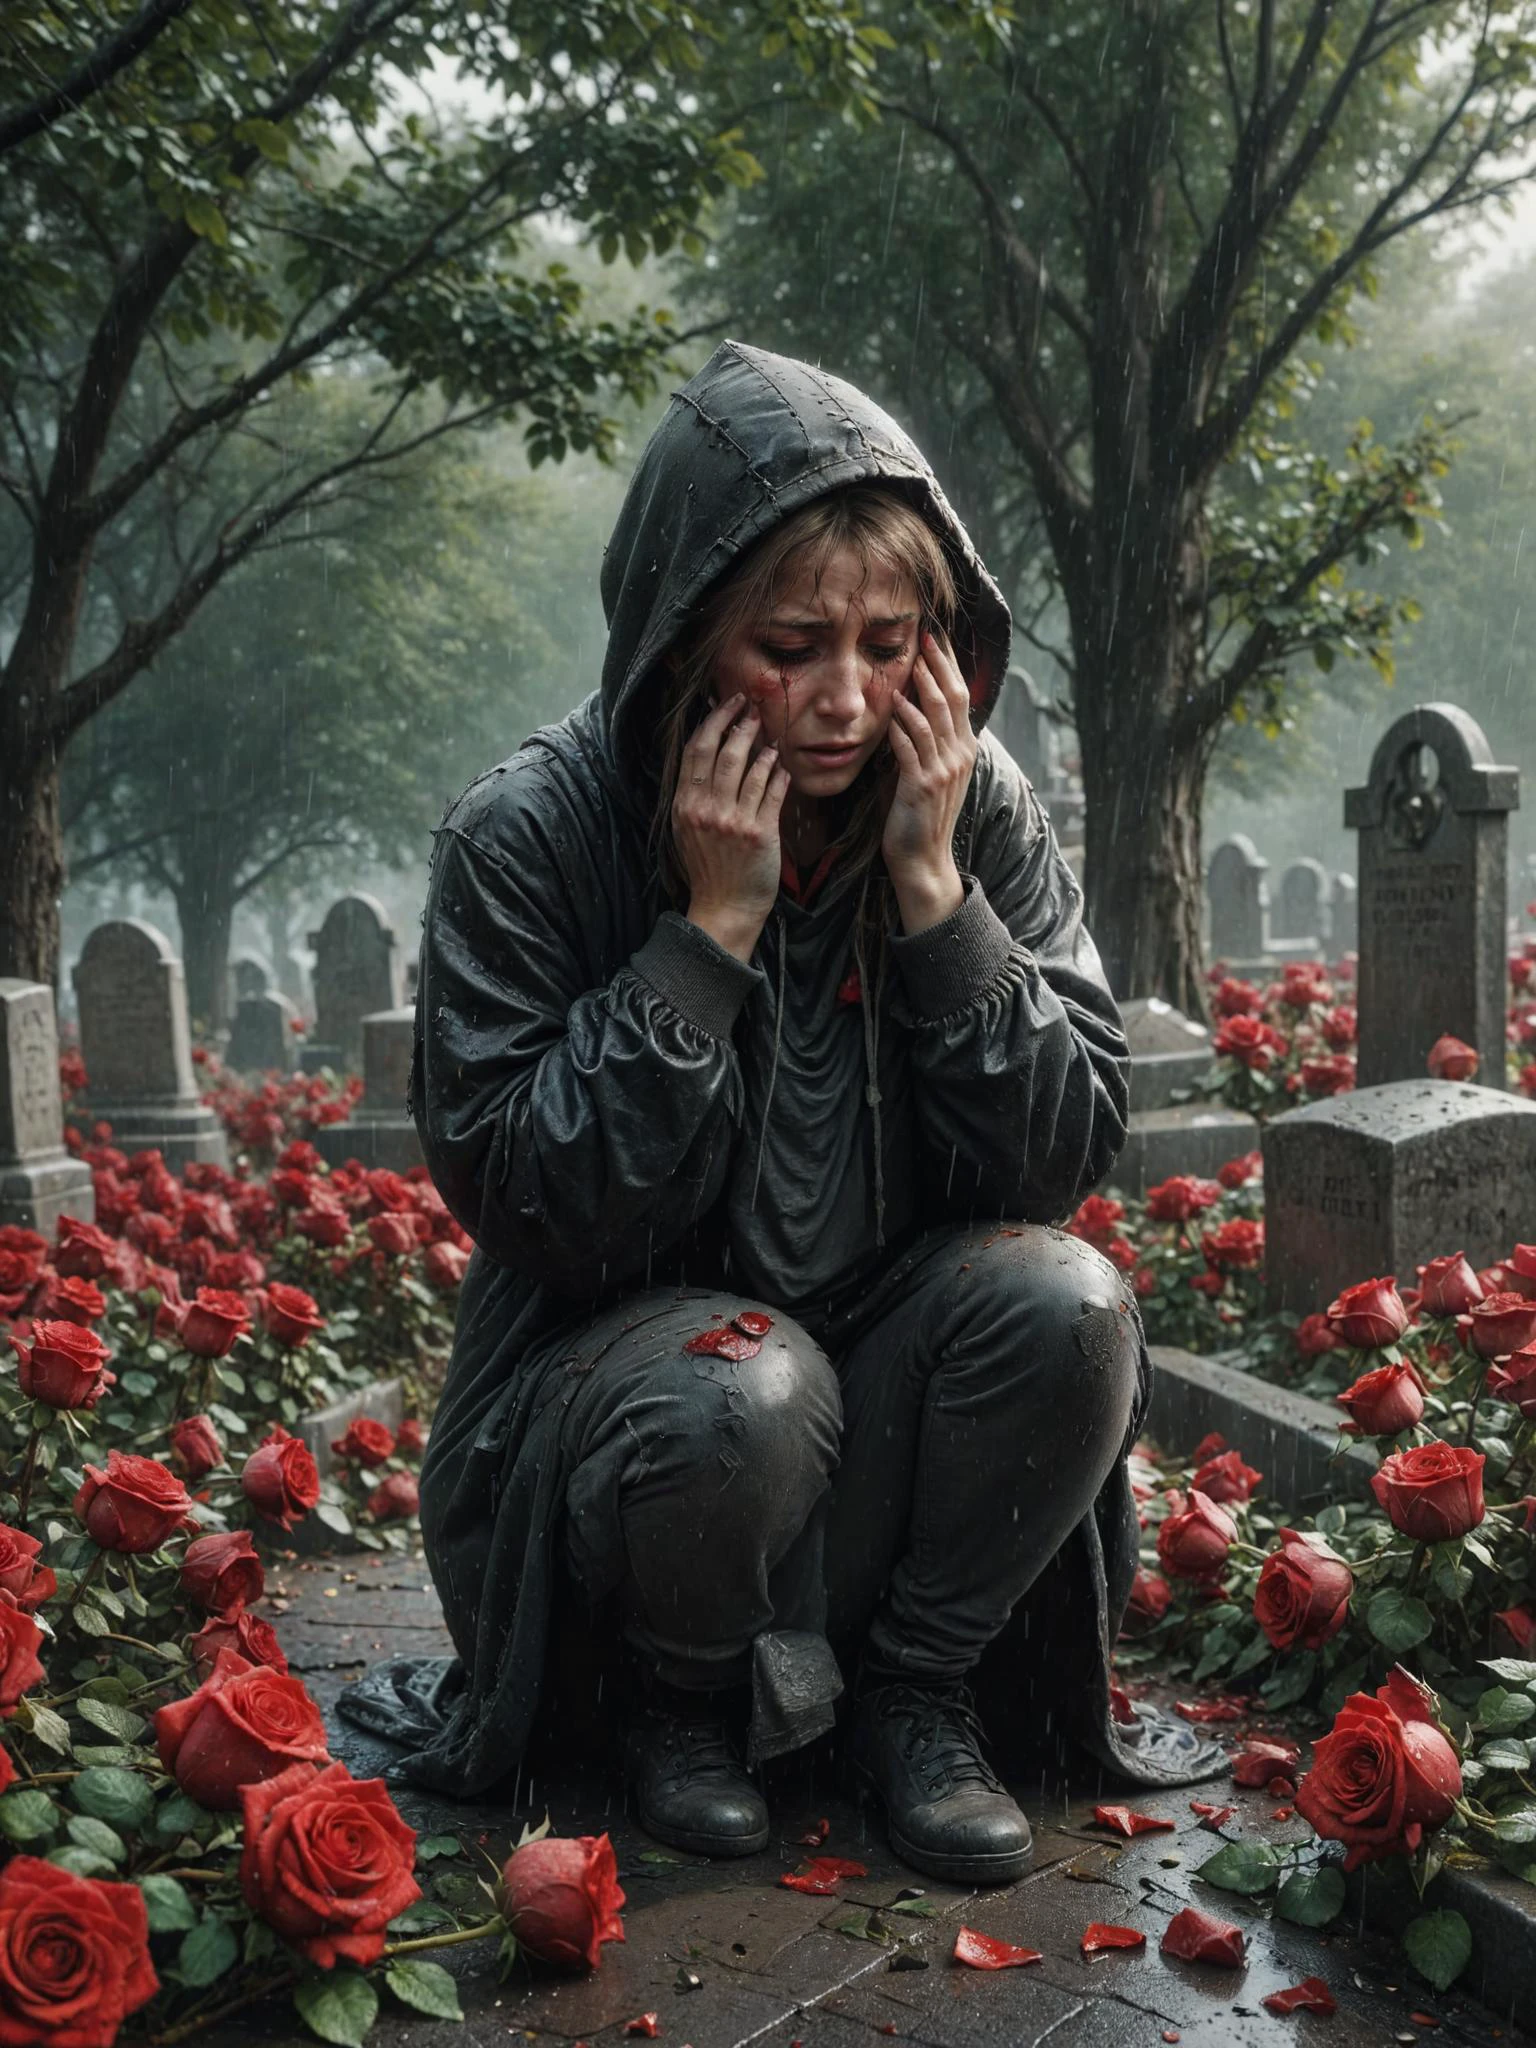 broken grief heart character crying, grief scene, most of red roses, most details, raining weather, blitz lighting at graveyard, 32k, UHD, HDR, crying, tears, wearing hood,  ais-abandz